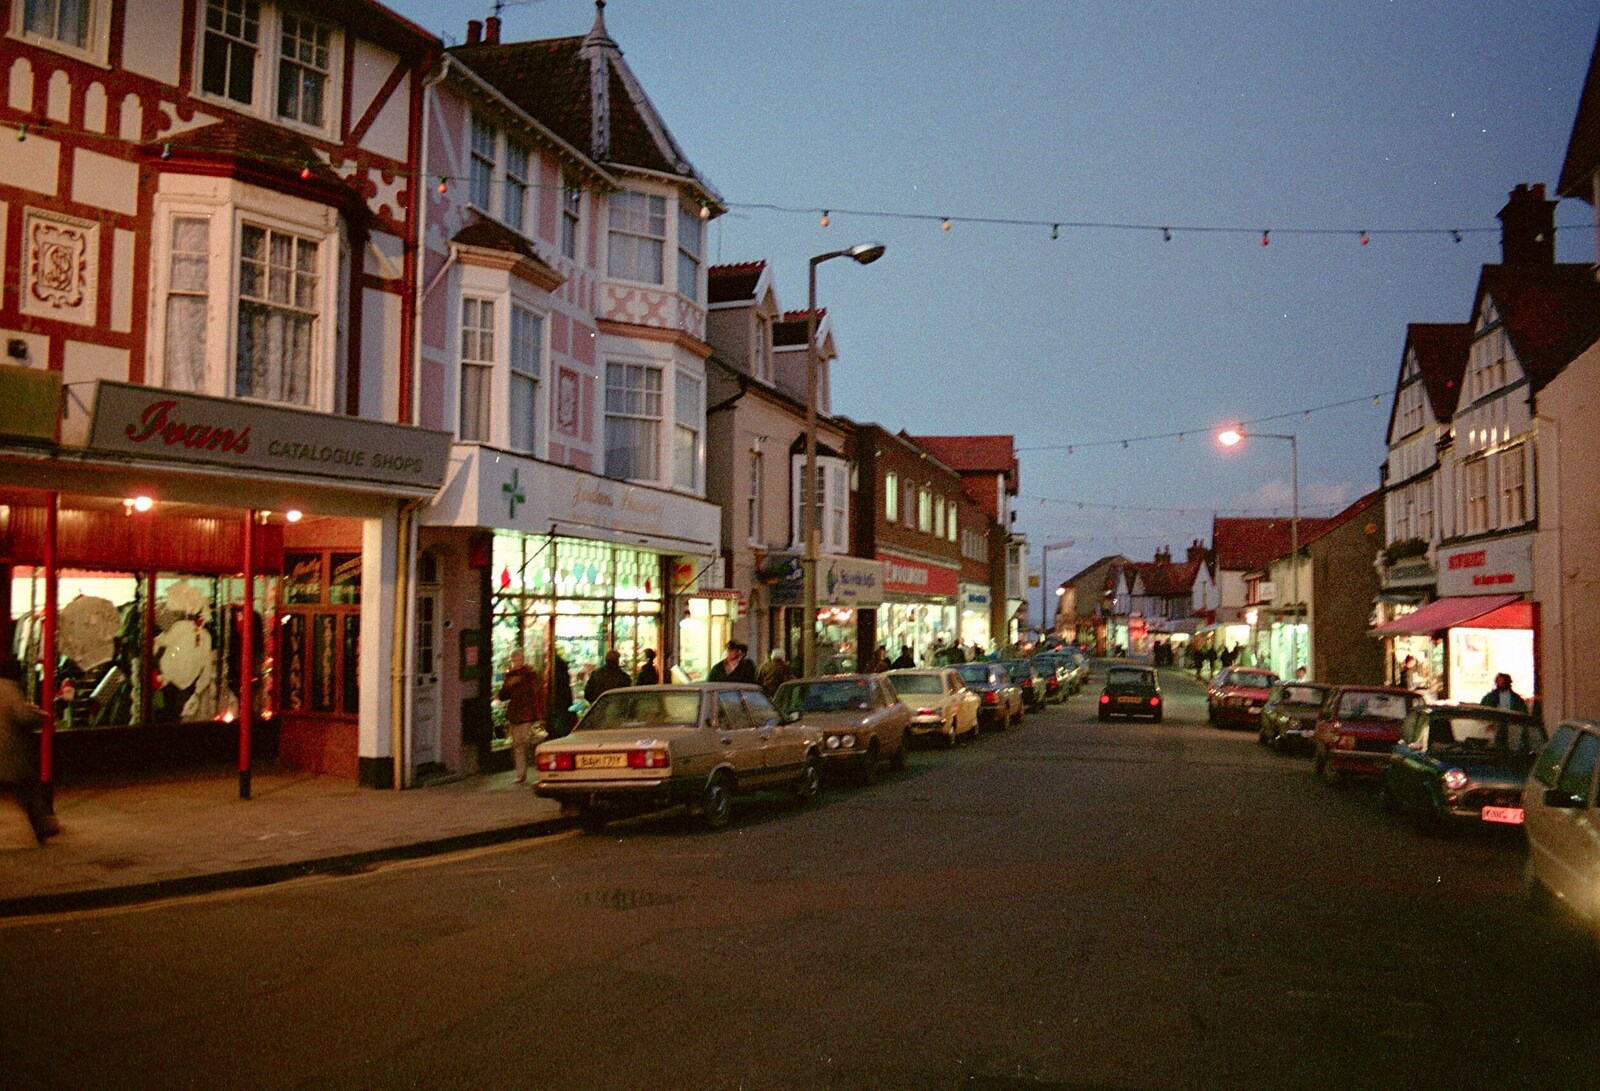 Sheringham High Street in the evening from A Visit to Sheringham, North Norfolk - 20th November 1987